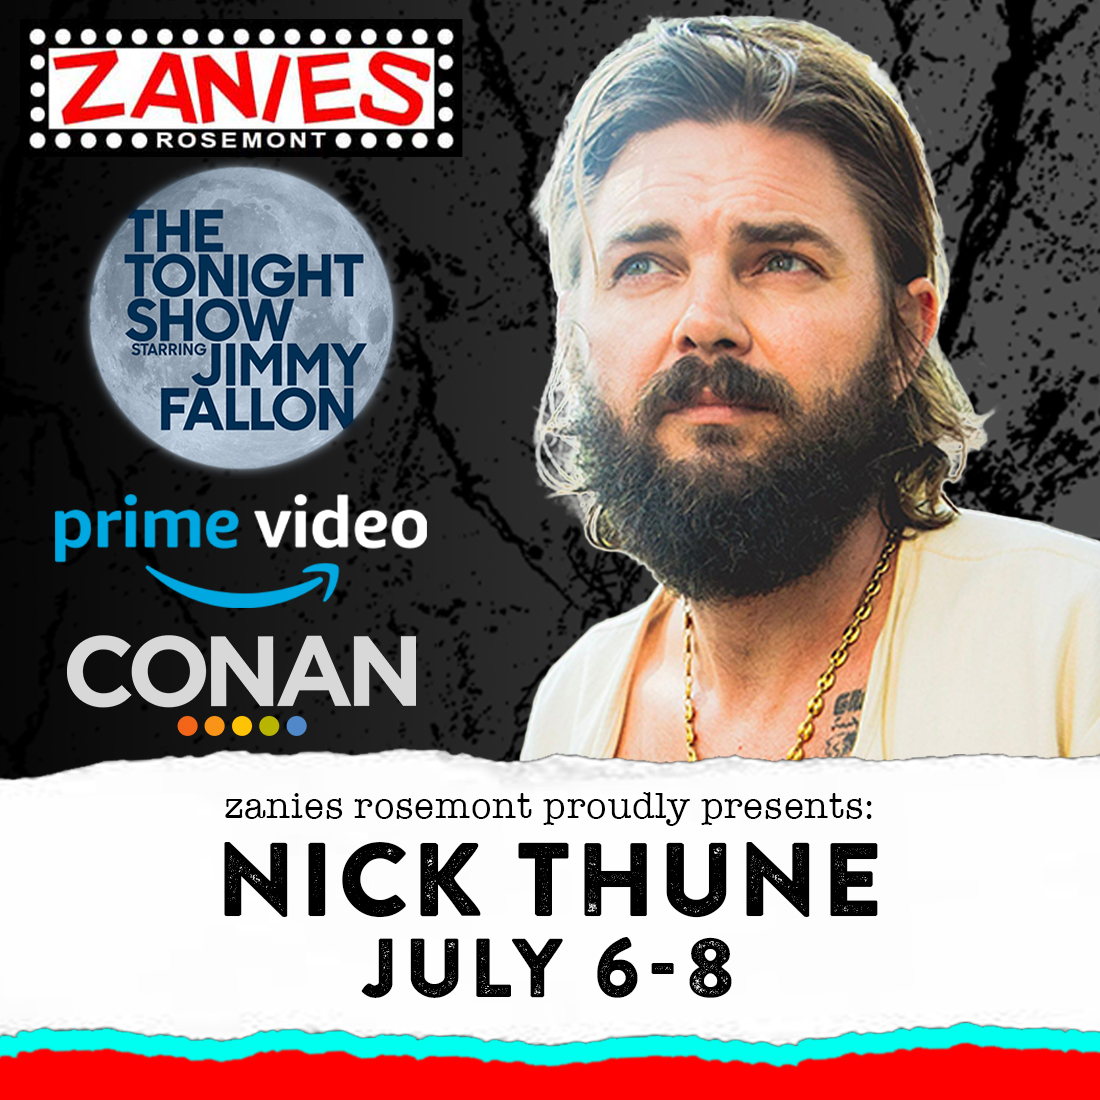 🚨 THIS WEEKEND AT ZANIES Comedian and Actor @nickthune heads to Zanies this weekend, July 6-8! Tickets are still available but are moving quickly so grab your tix while you can, Chicagoland--> bit.ly/Rosemont_Thune